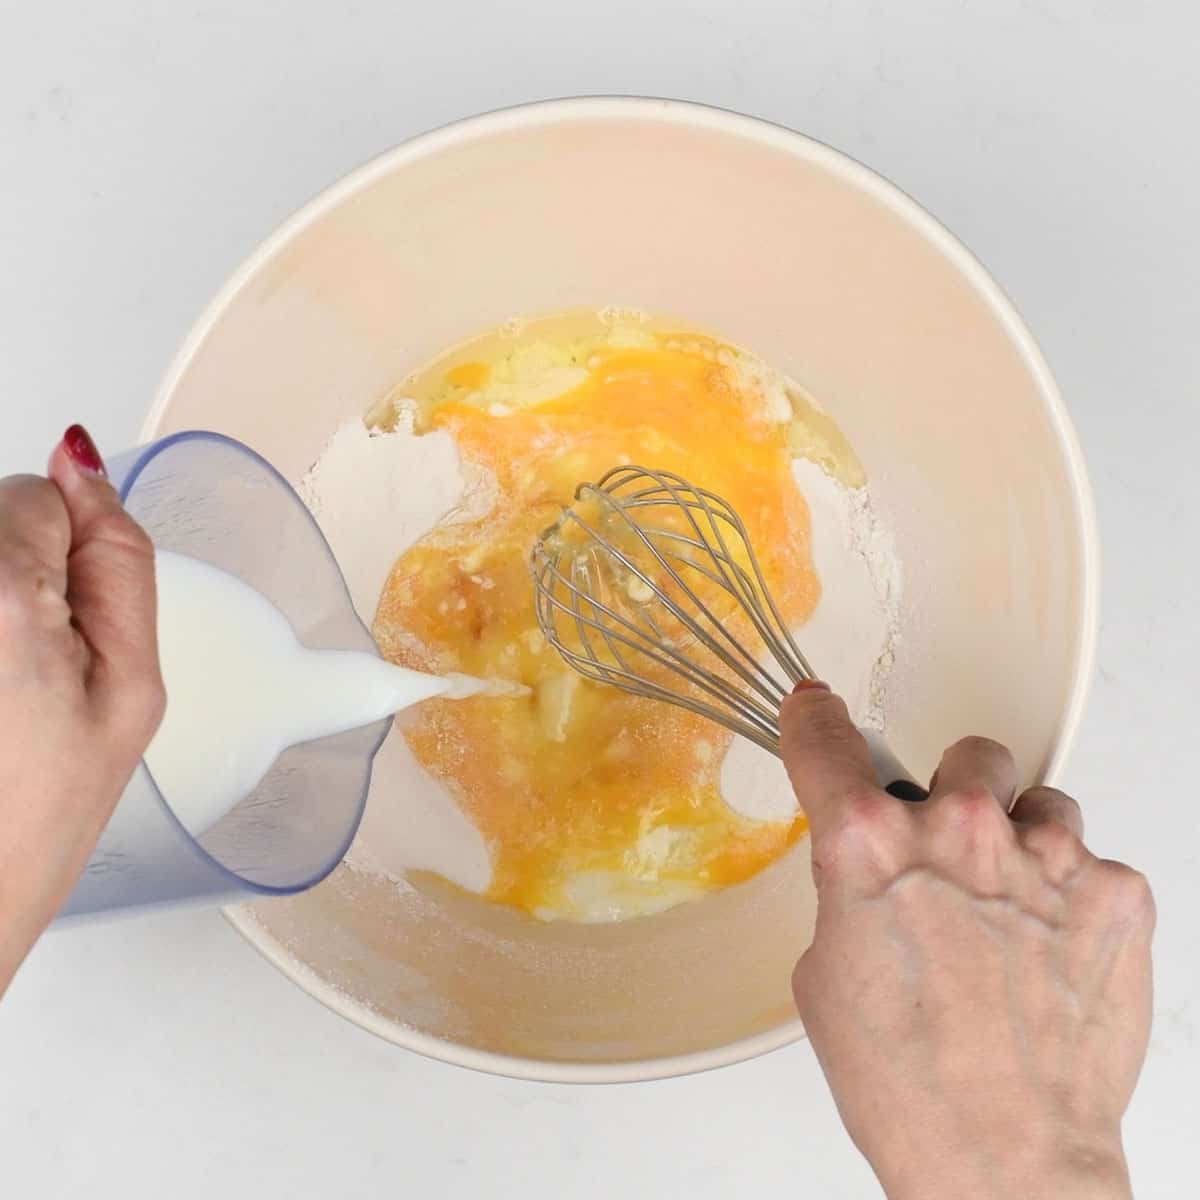 Mixing flour eggs and milk to make pancake batter in a bowl